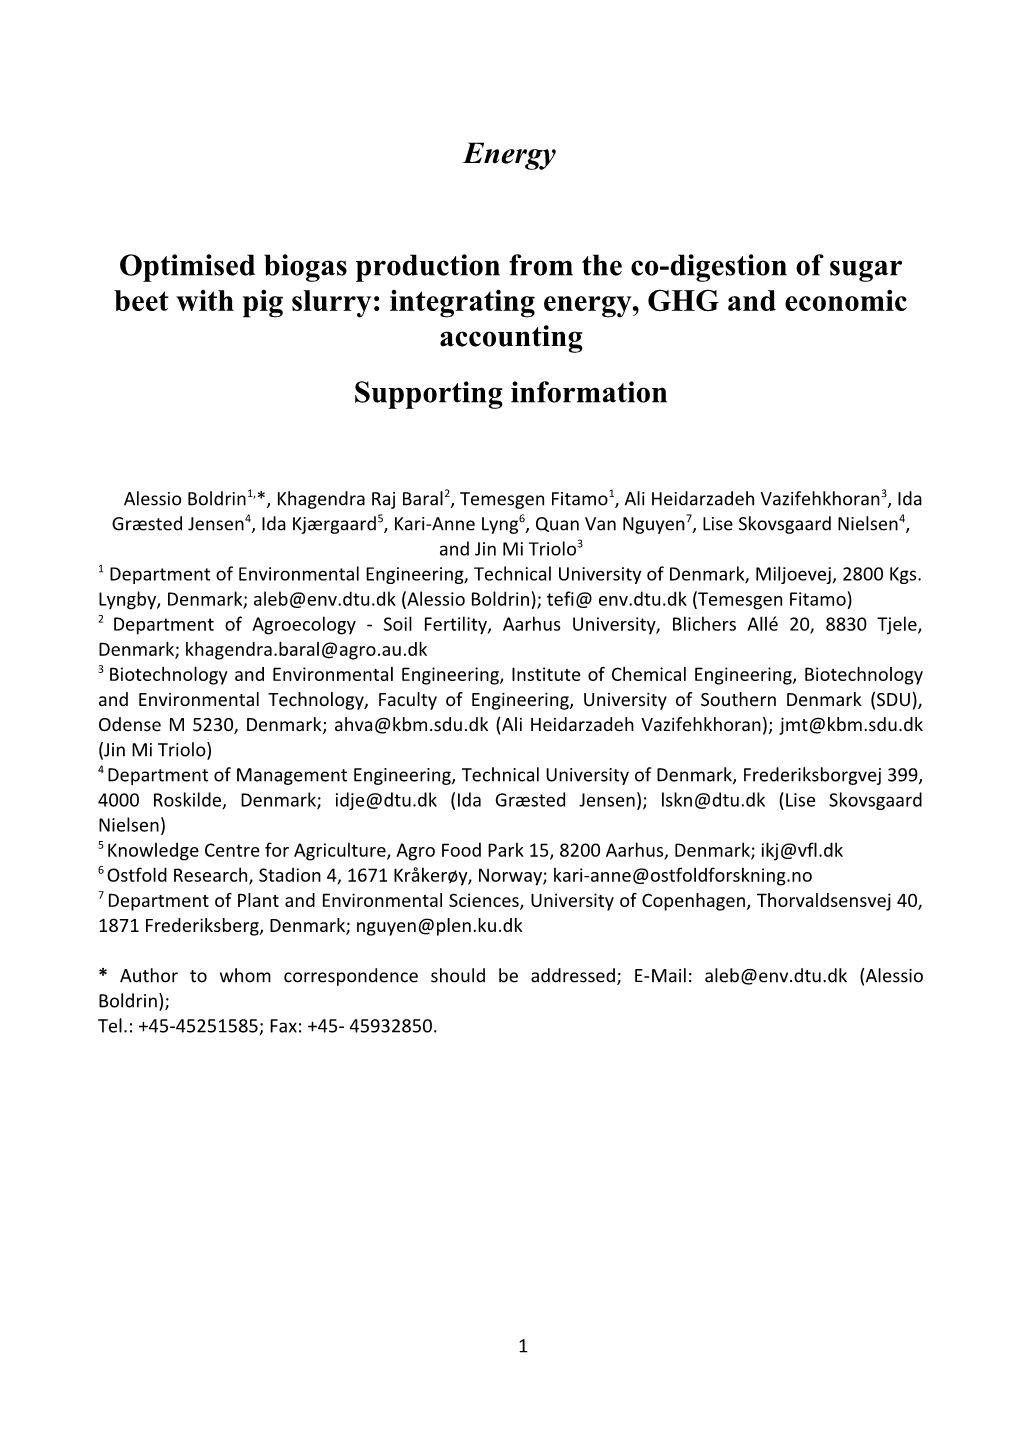 Optimised Biogas Production from the Co-Digestion of Sugar Beet with Pig Slurry: Integrating